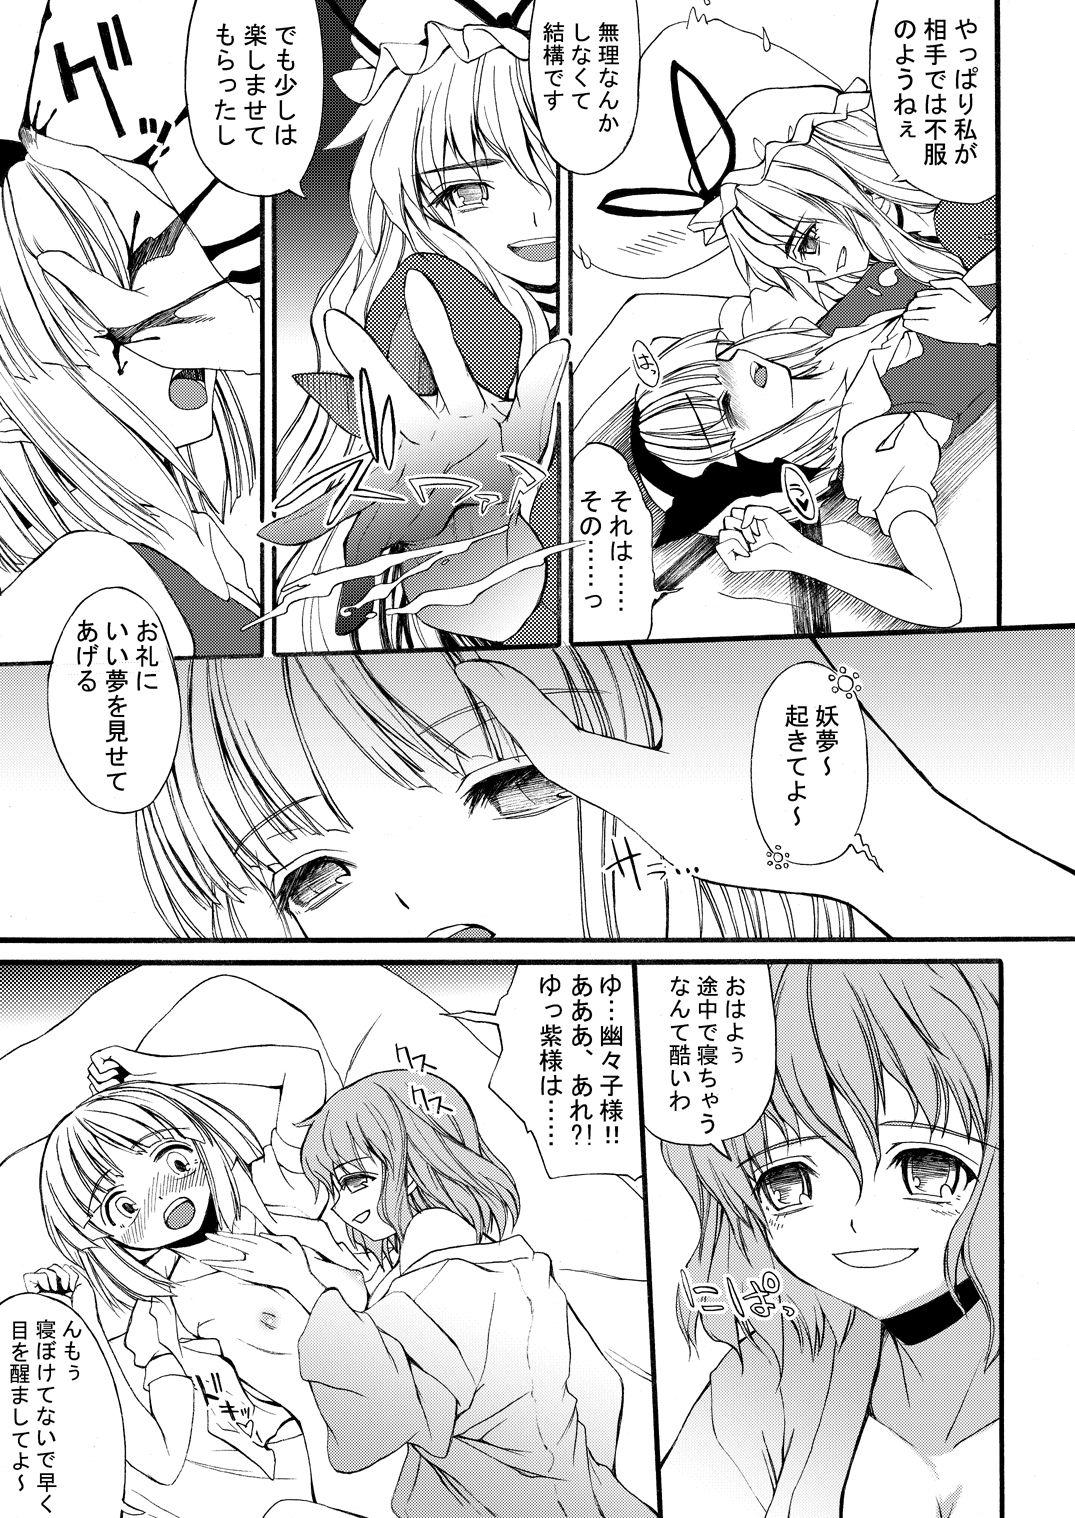 Femboy 白玉サクラガサネ/サナギ - Touhou project Amateur Free Porn - Page 10